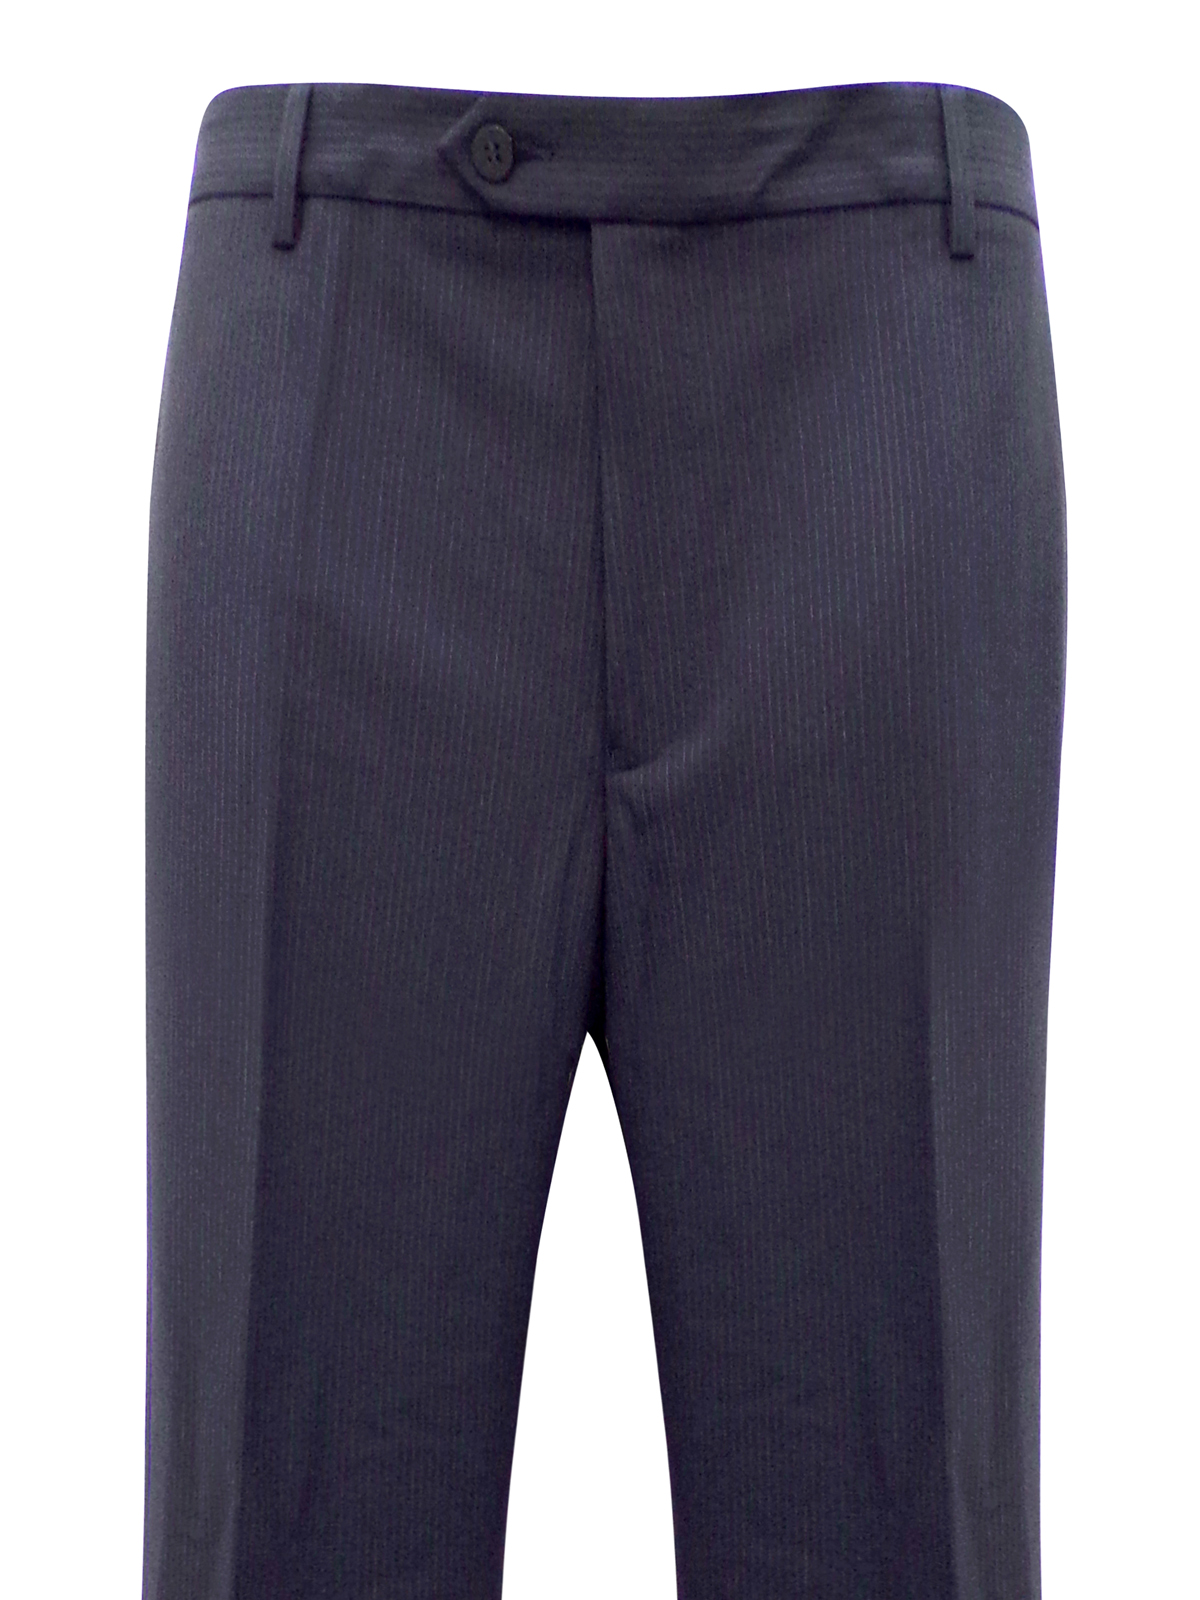 Marks and Spencer - - M&5 NAVY Wool Blend Flat Front Trousers - Waist ...